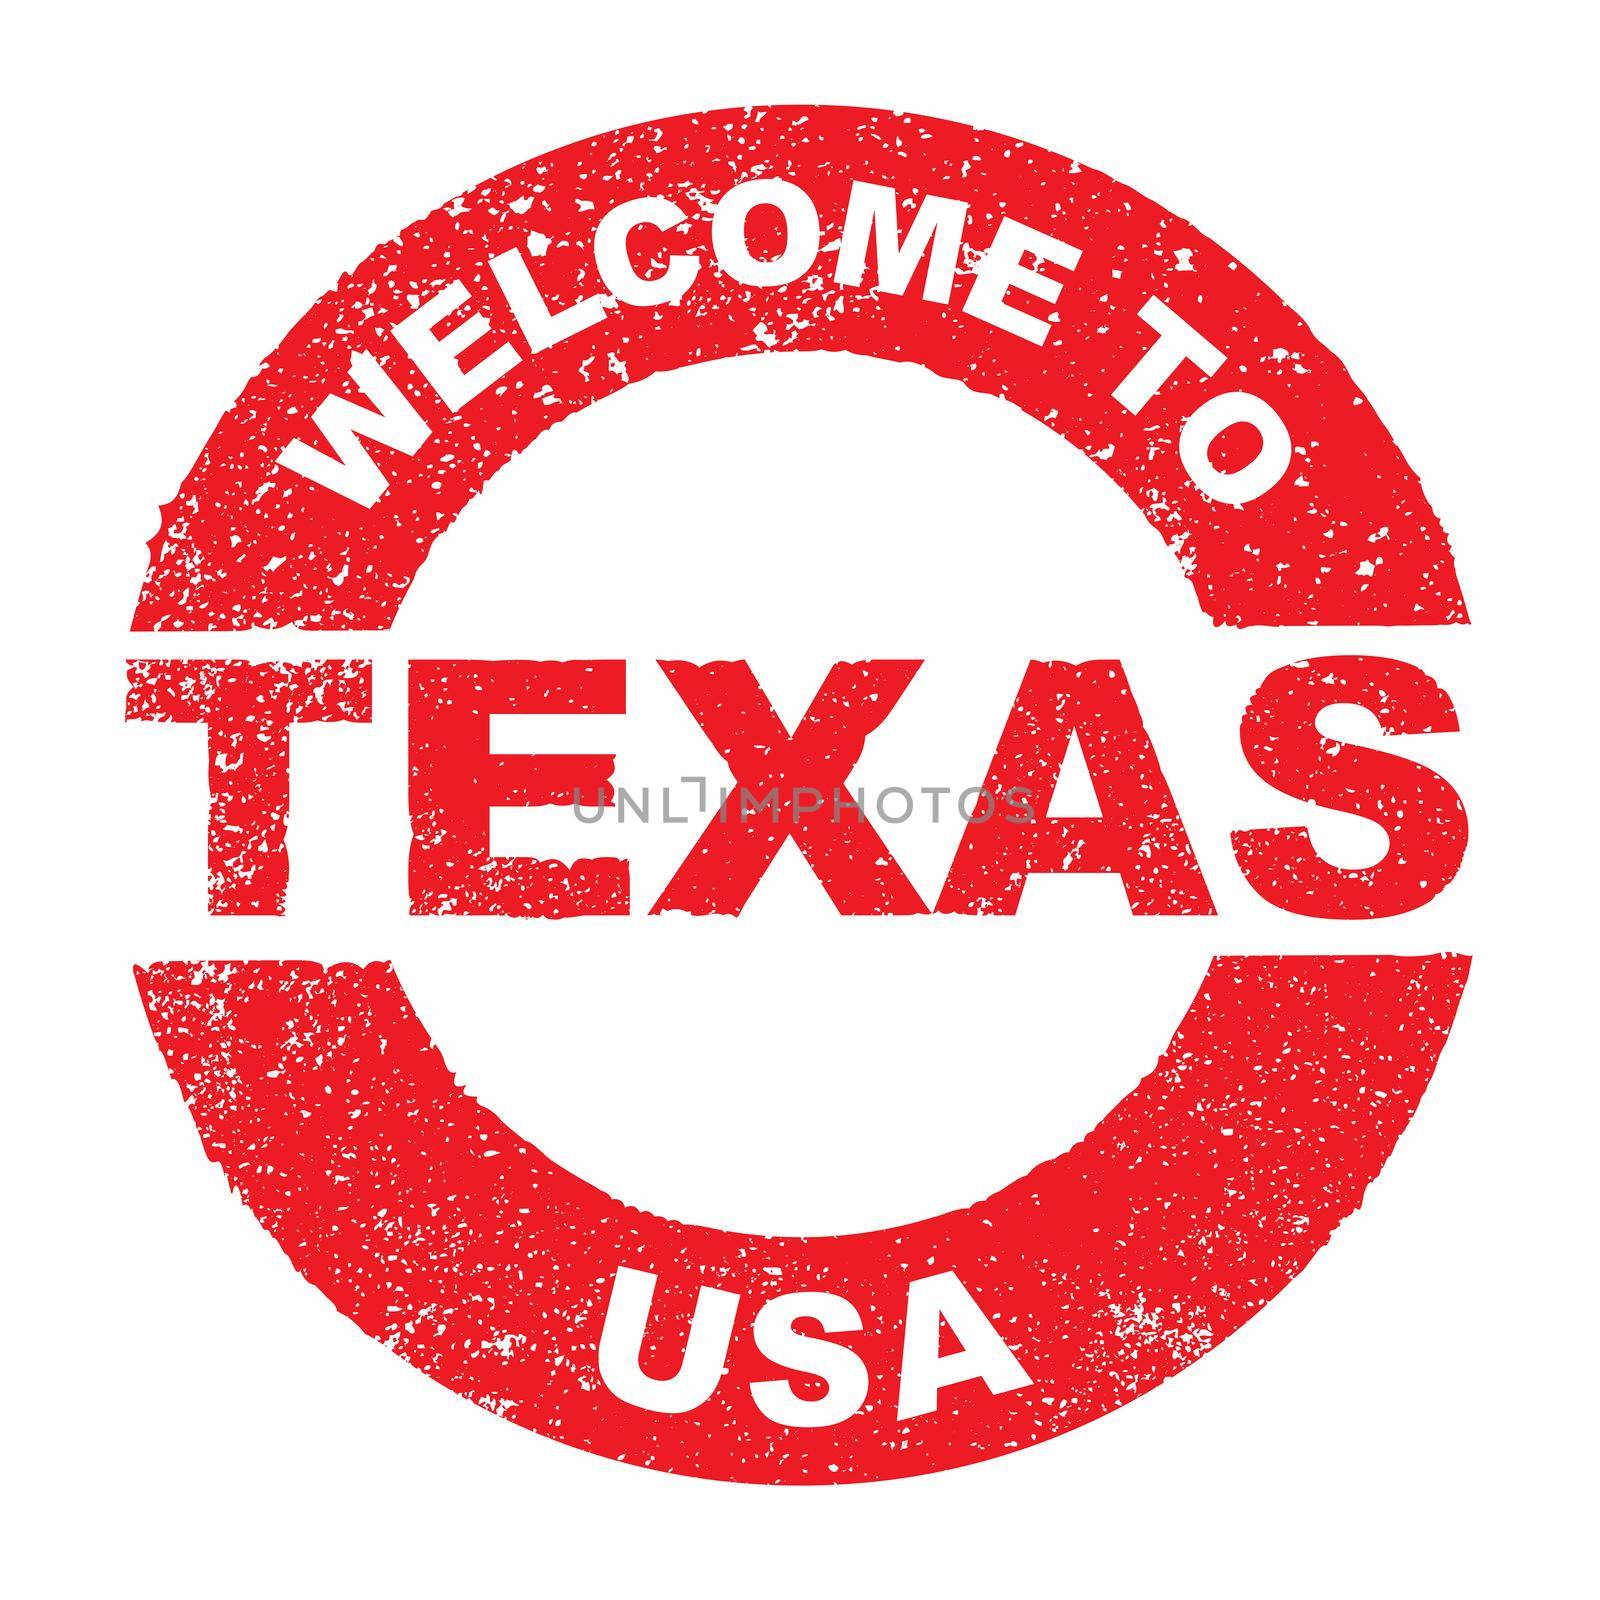 A grunge rubber ink stamp with the text Welcome To Texas USA over a white background